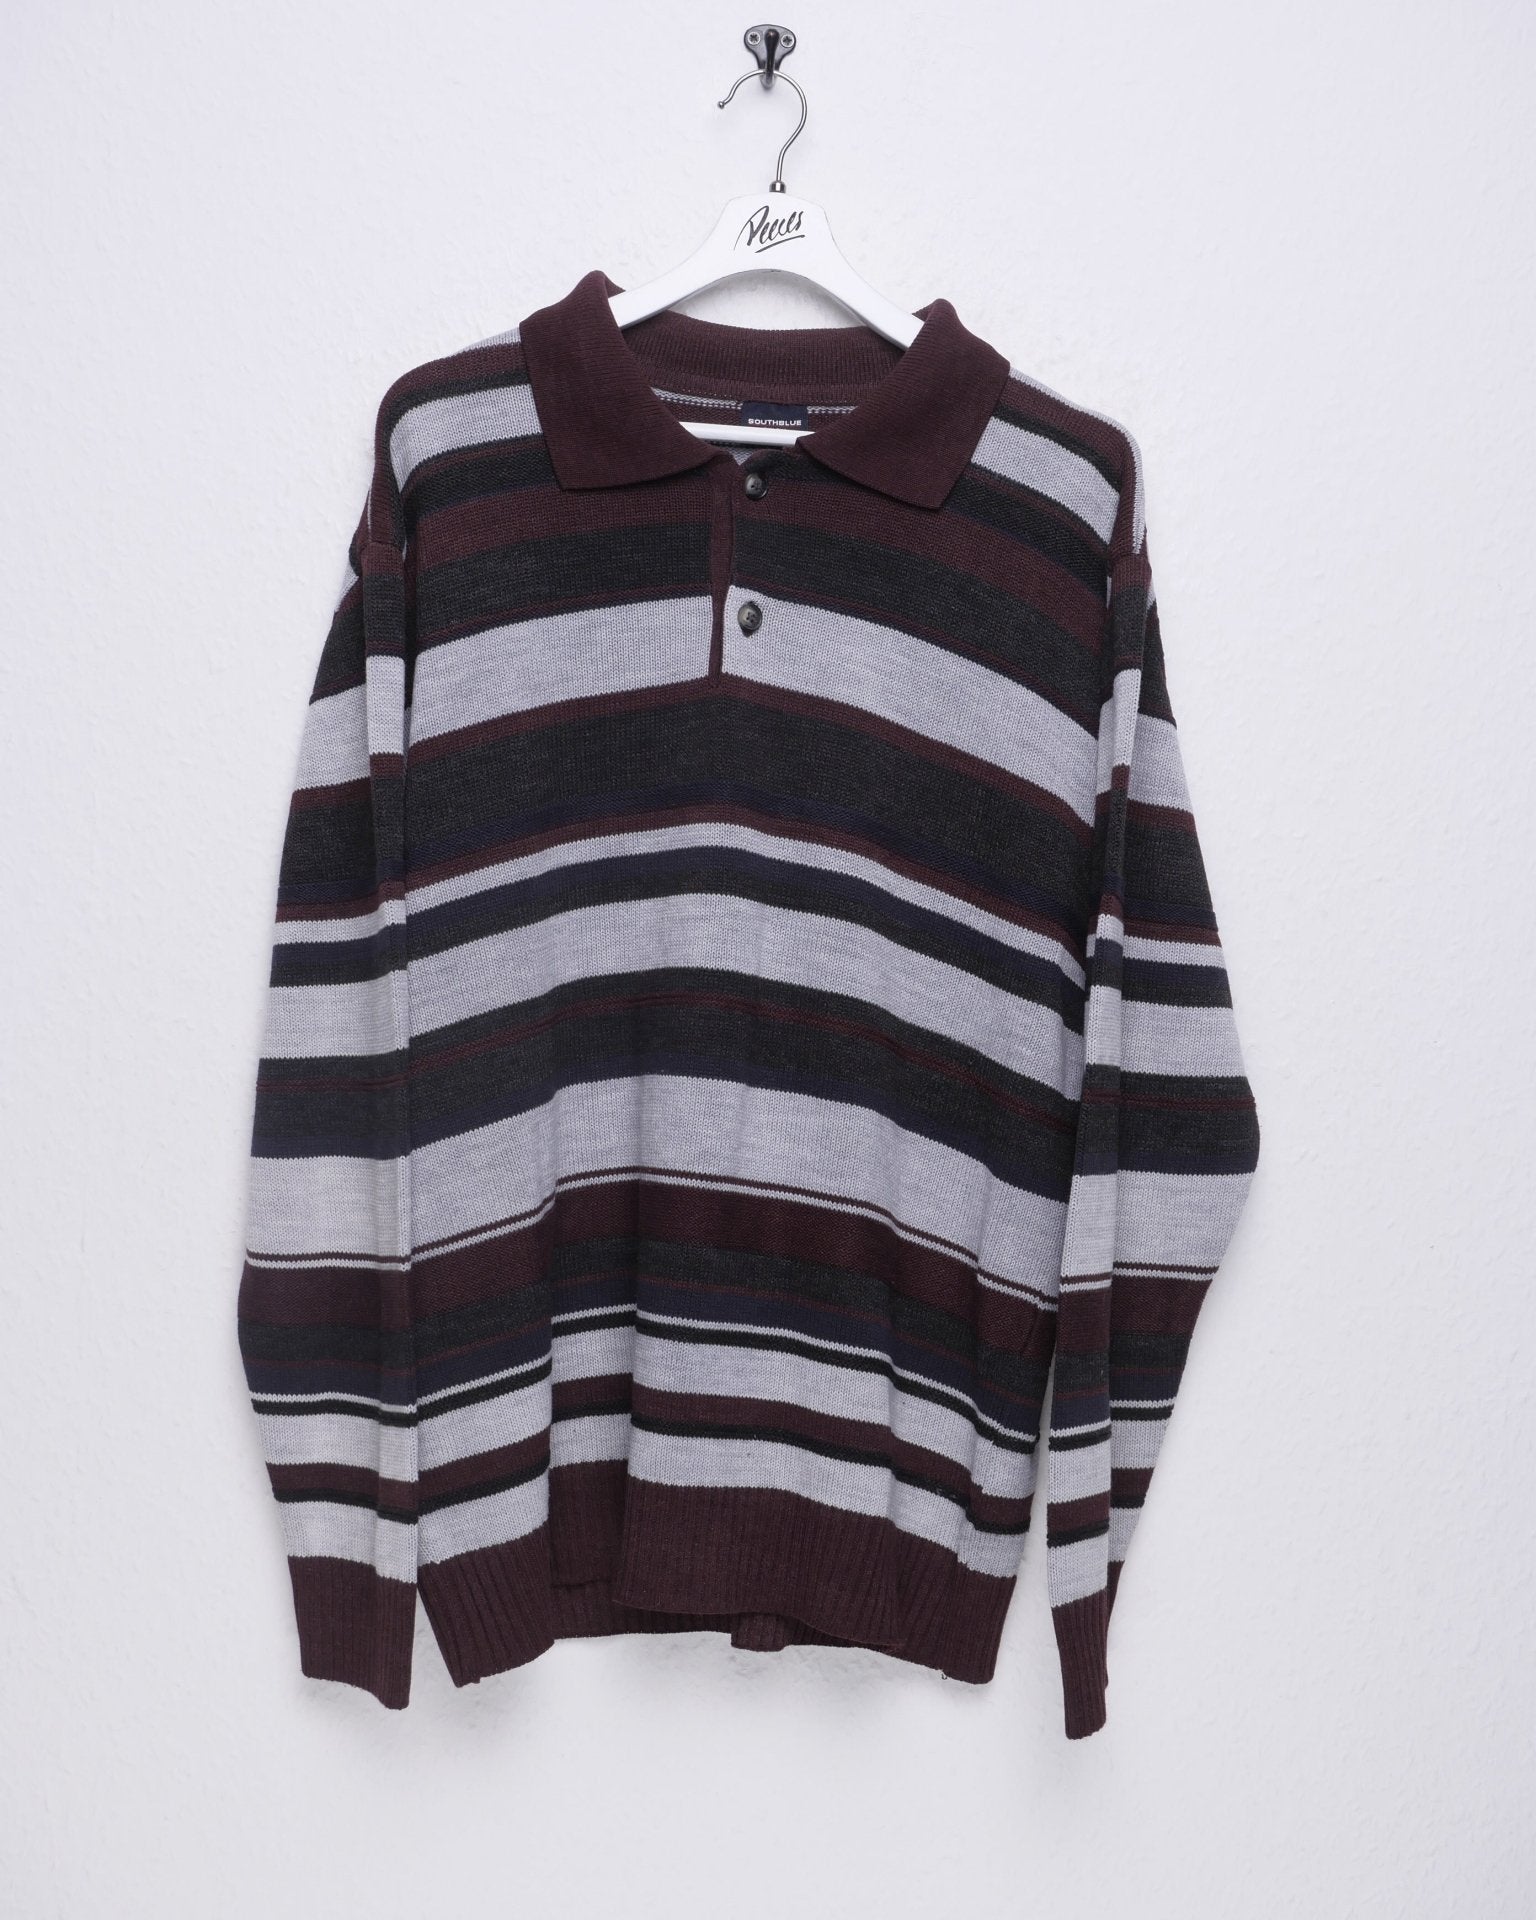 Vintage knitted striped half buttoned Sweater - Peeces